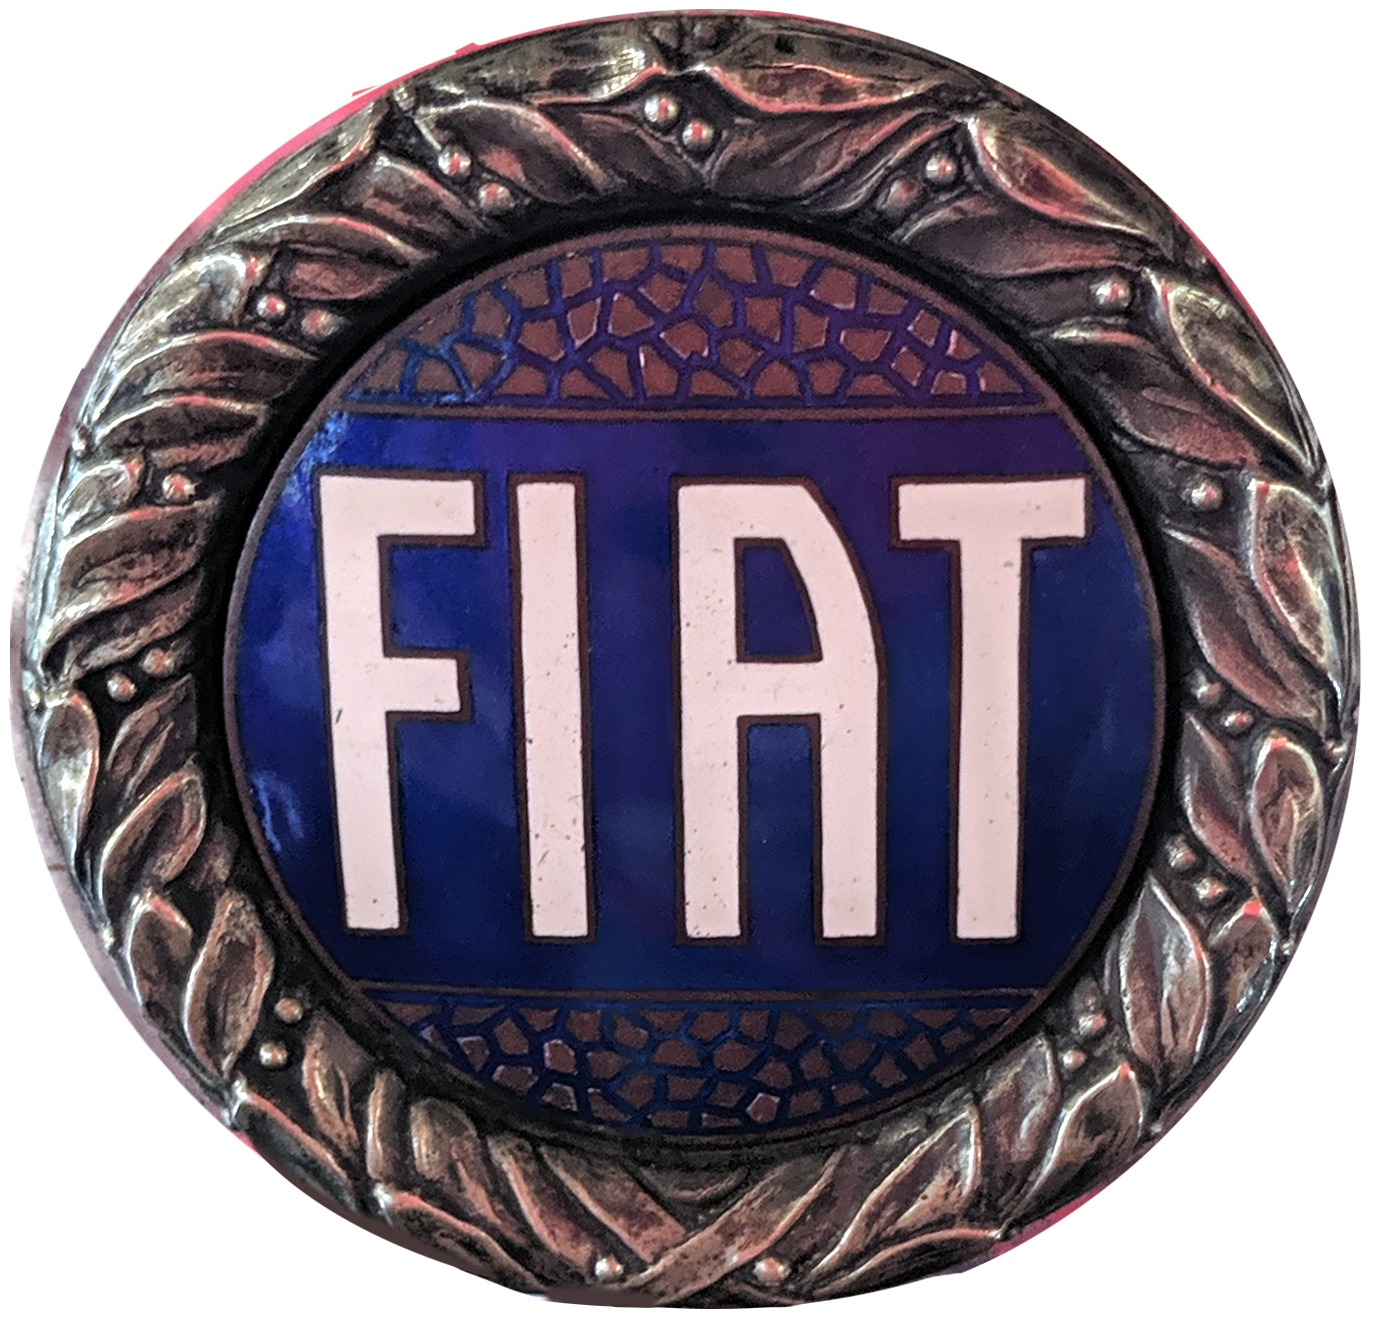 File:Fiat old logo on 514 model.png - Wikipedia